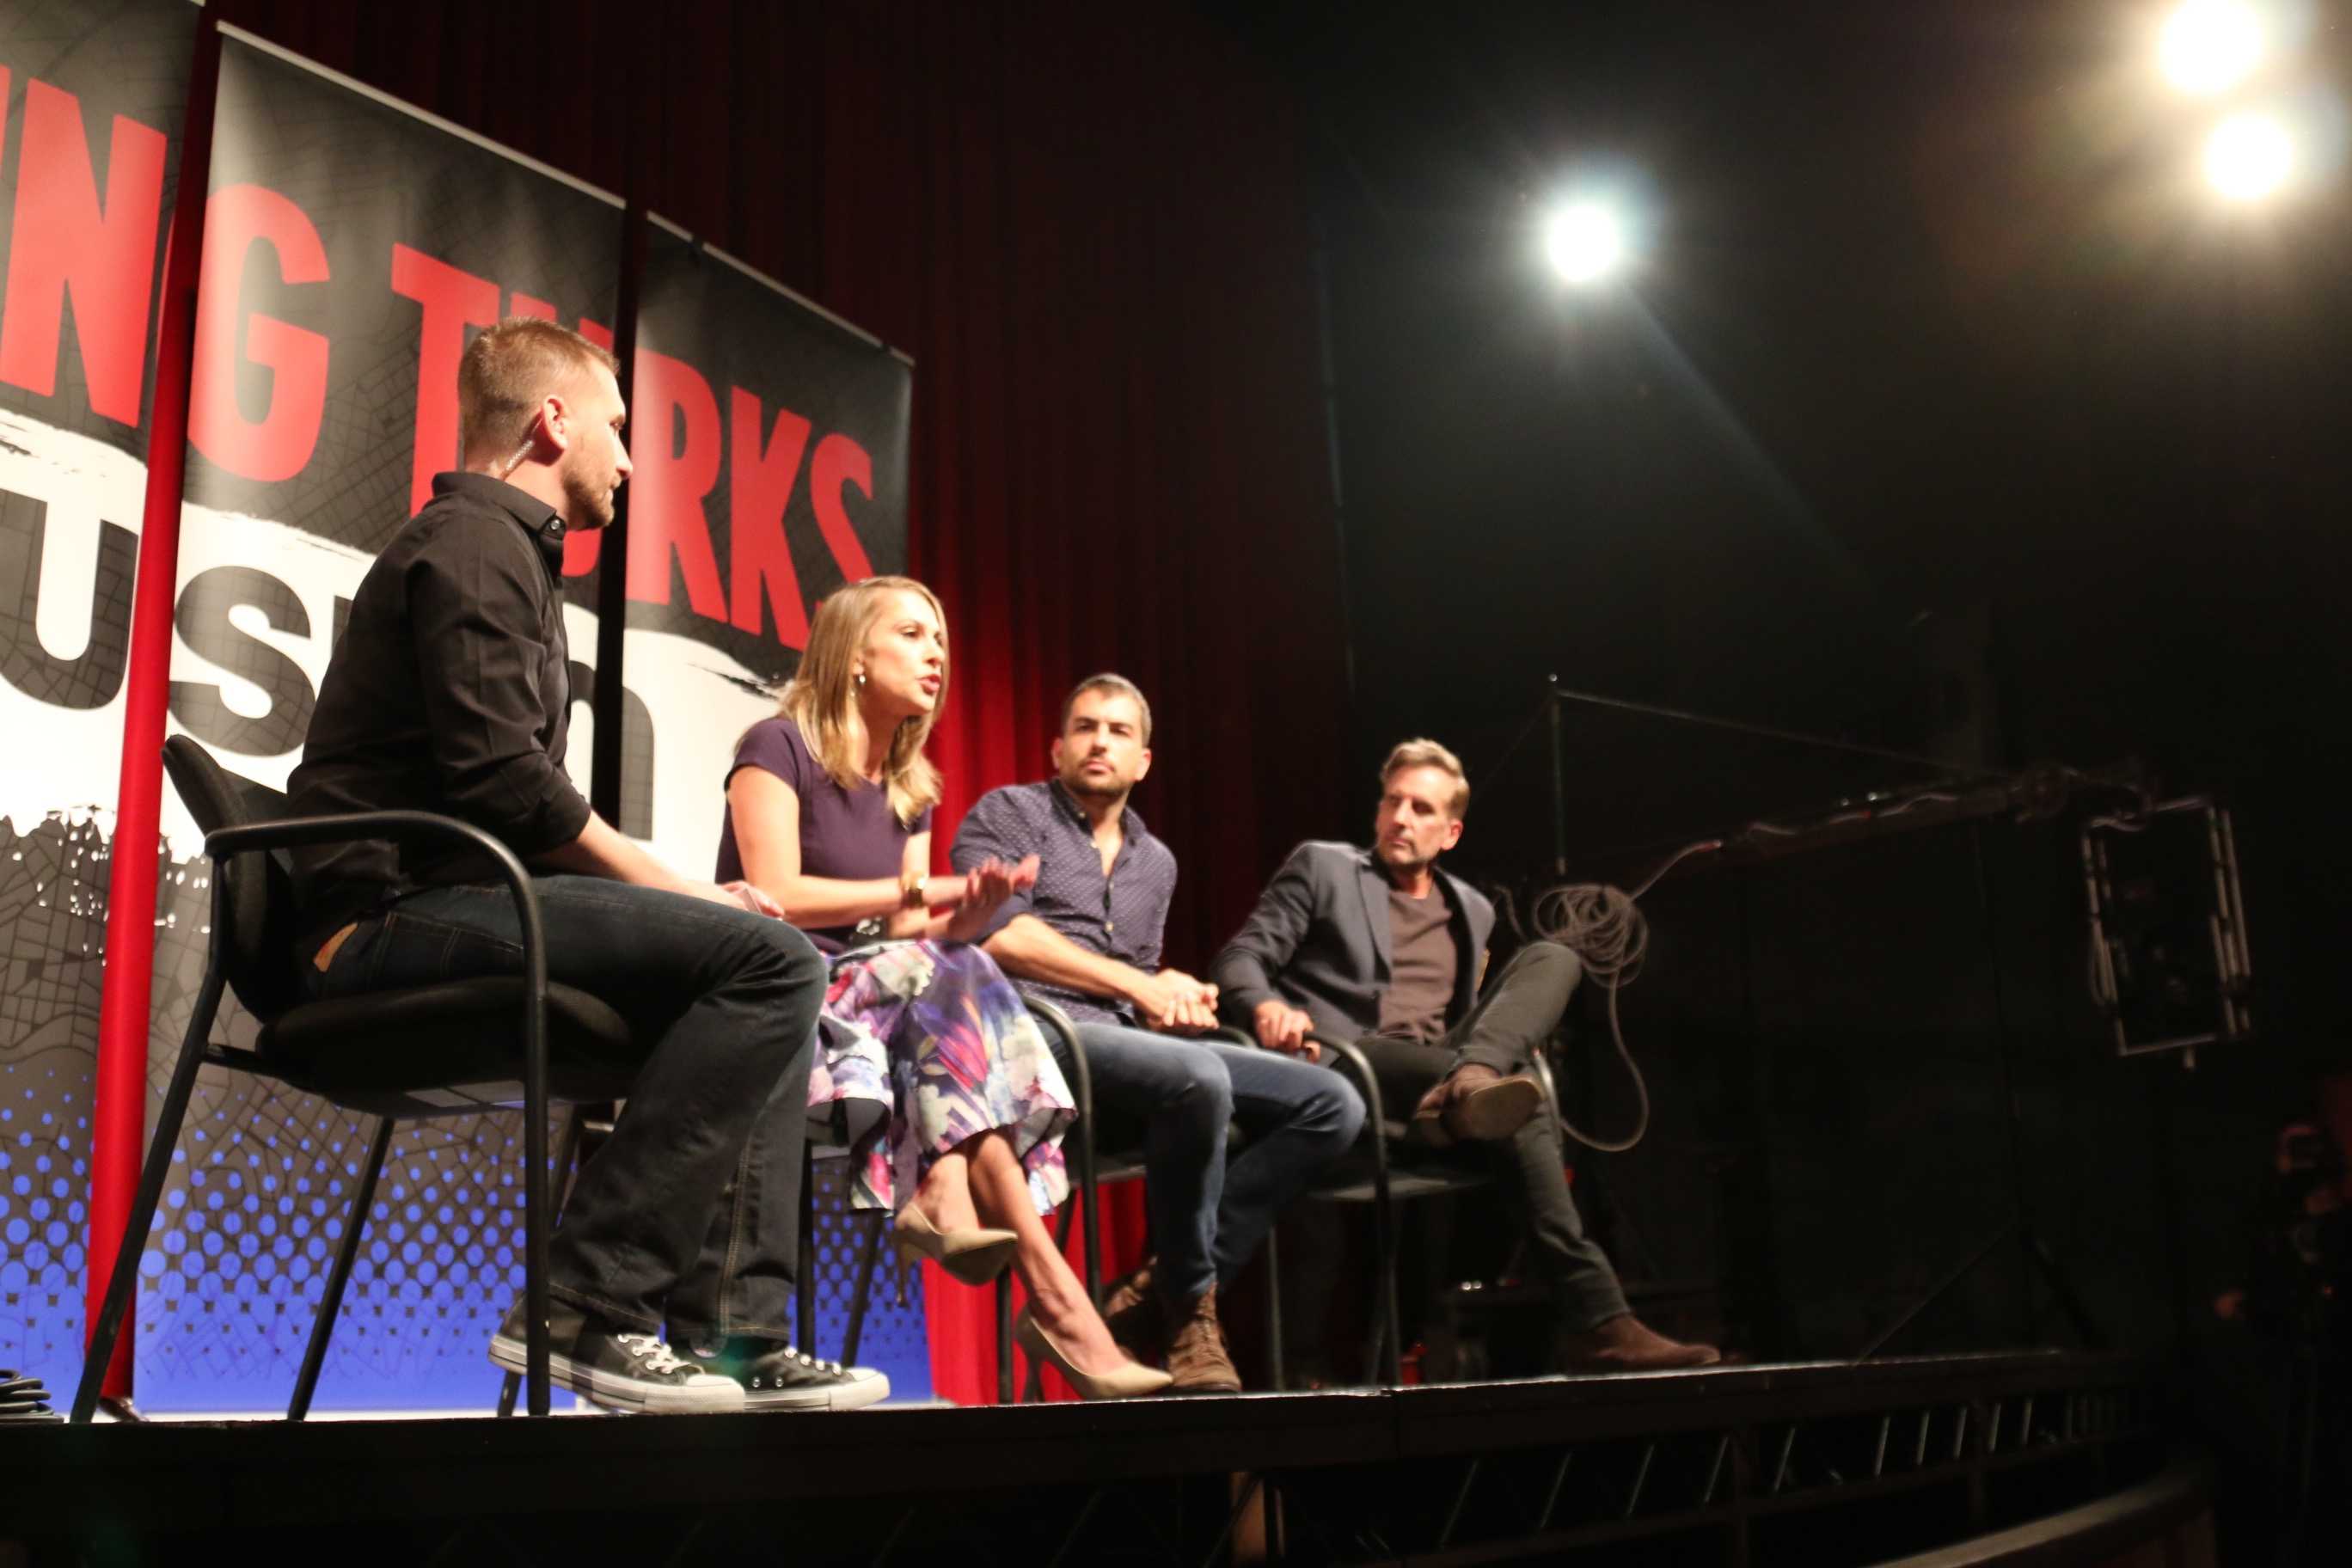 Ana Kasparian(2nd to the left) has a heated exchange with heckler at the filming of The Young Turks in The Little theatre in Nordhoff Hall at roughly Photo credit: Blaise Scemama